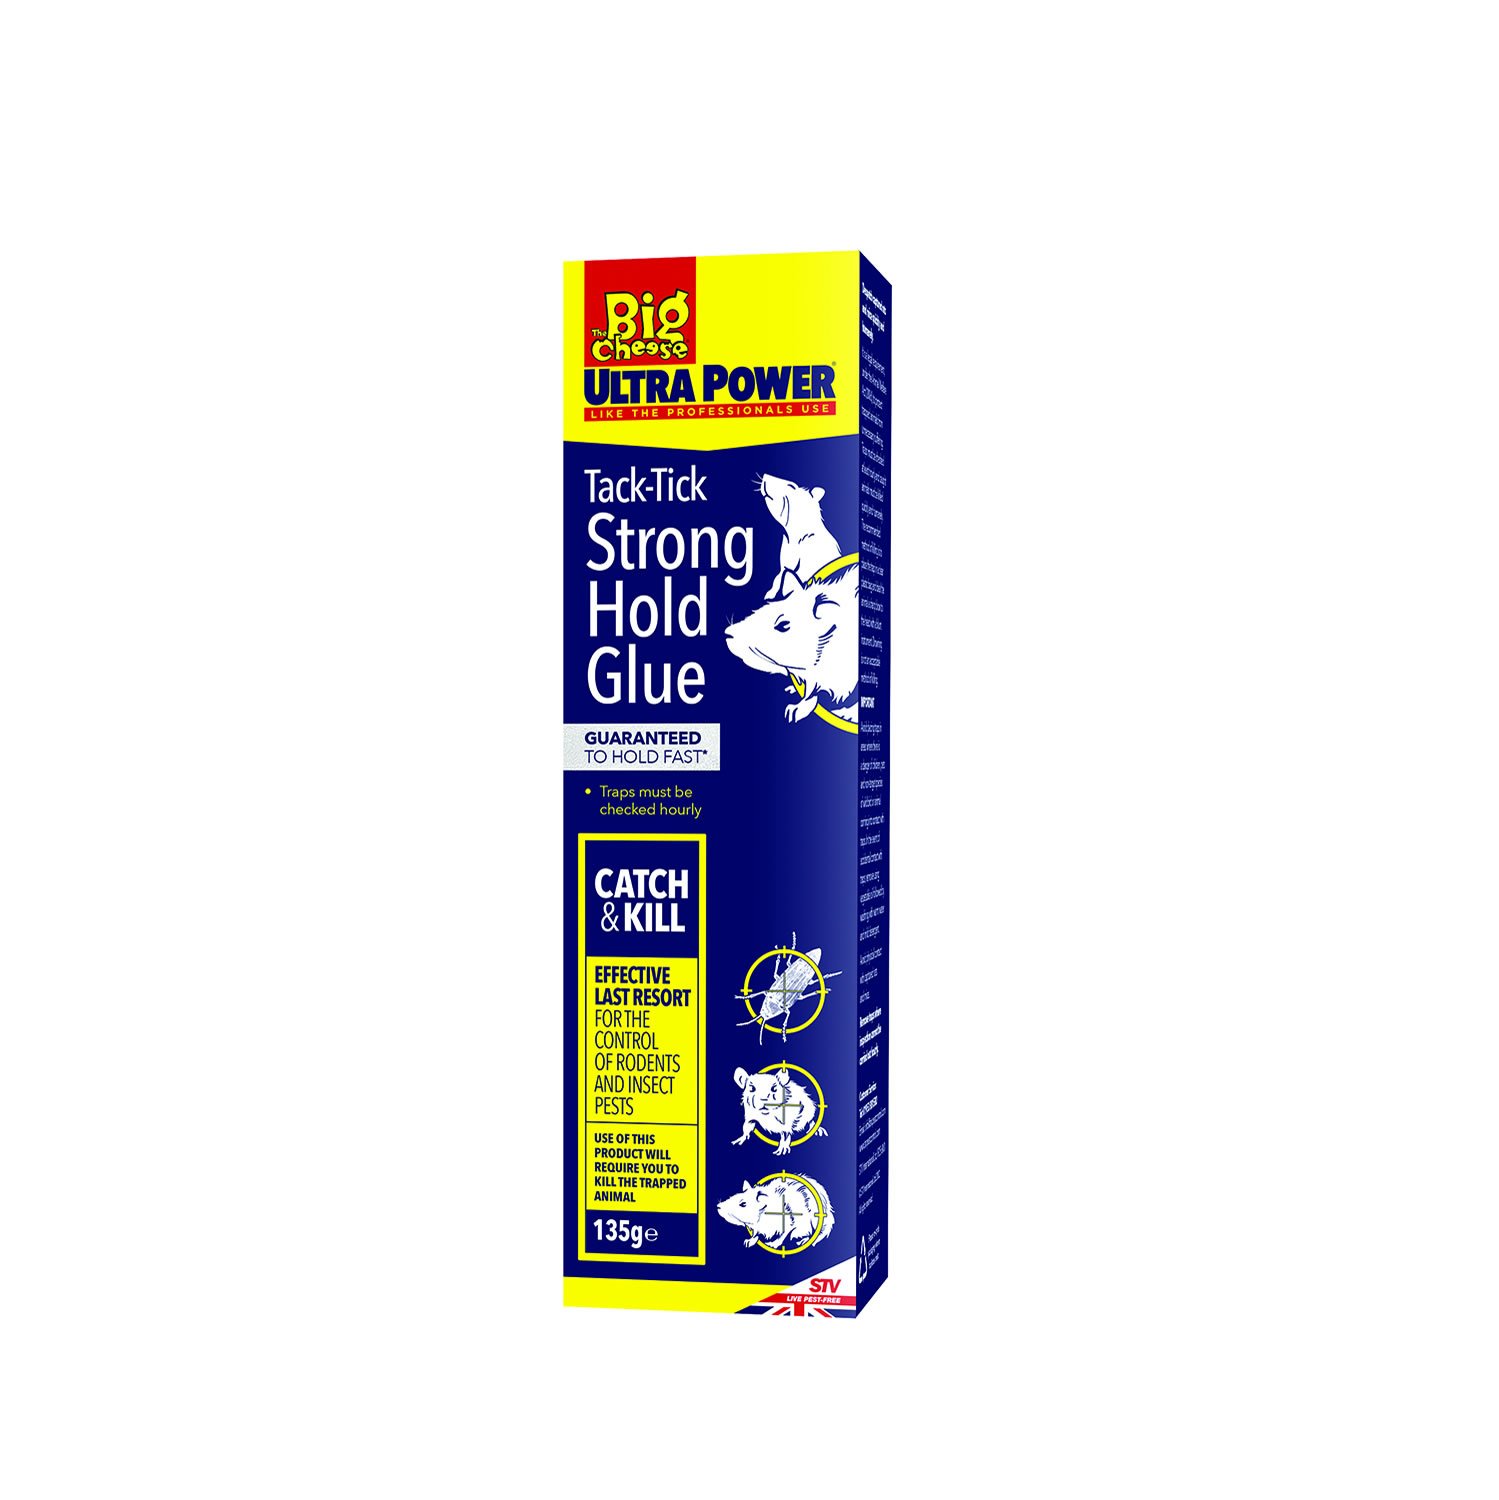 THE BIG CHEESE ULTRA POWER TACK-TICK STRONGHOLD GLUE 135 GM